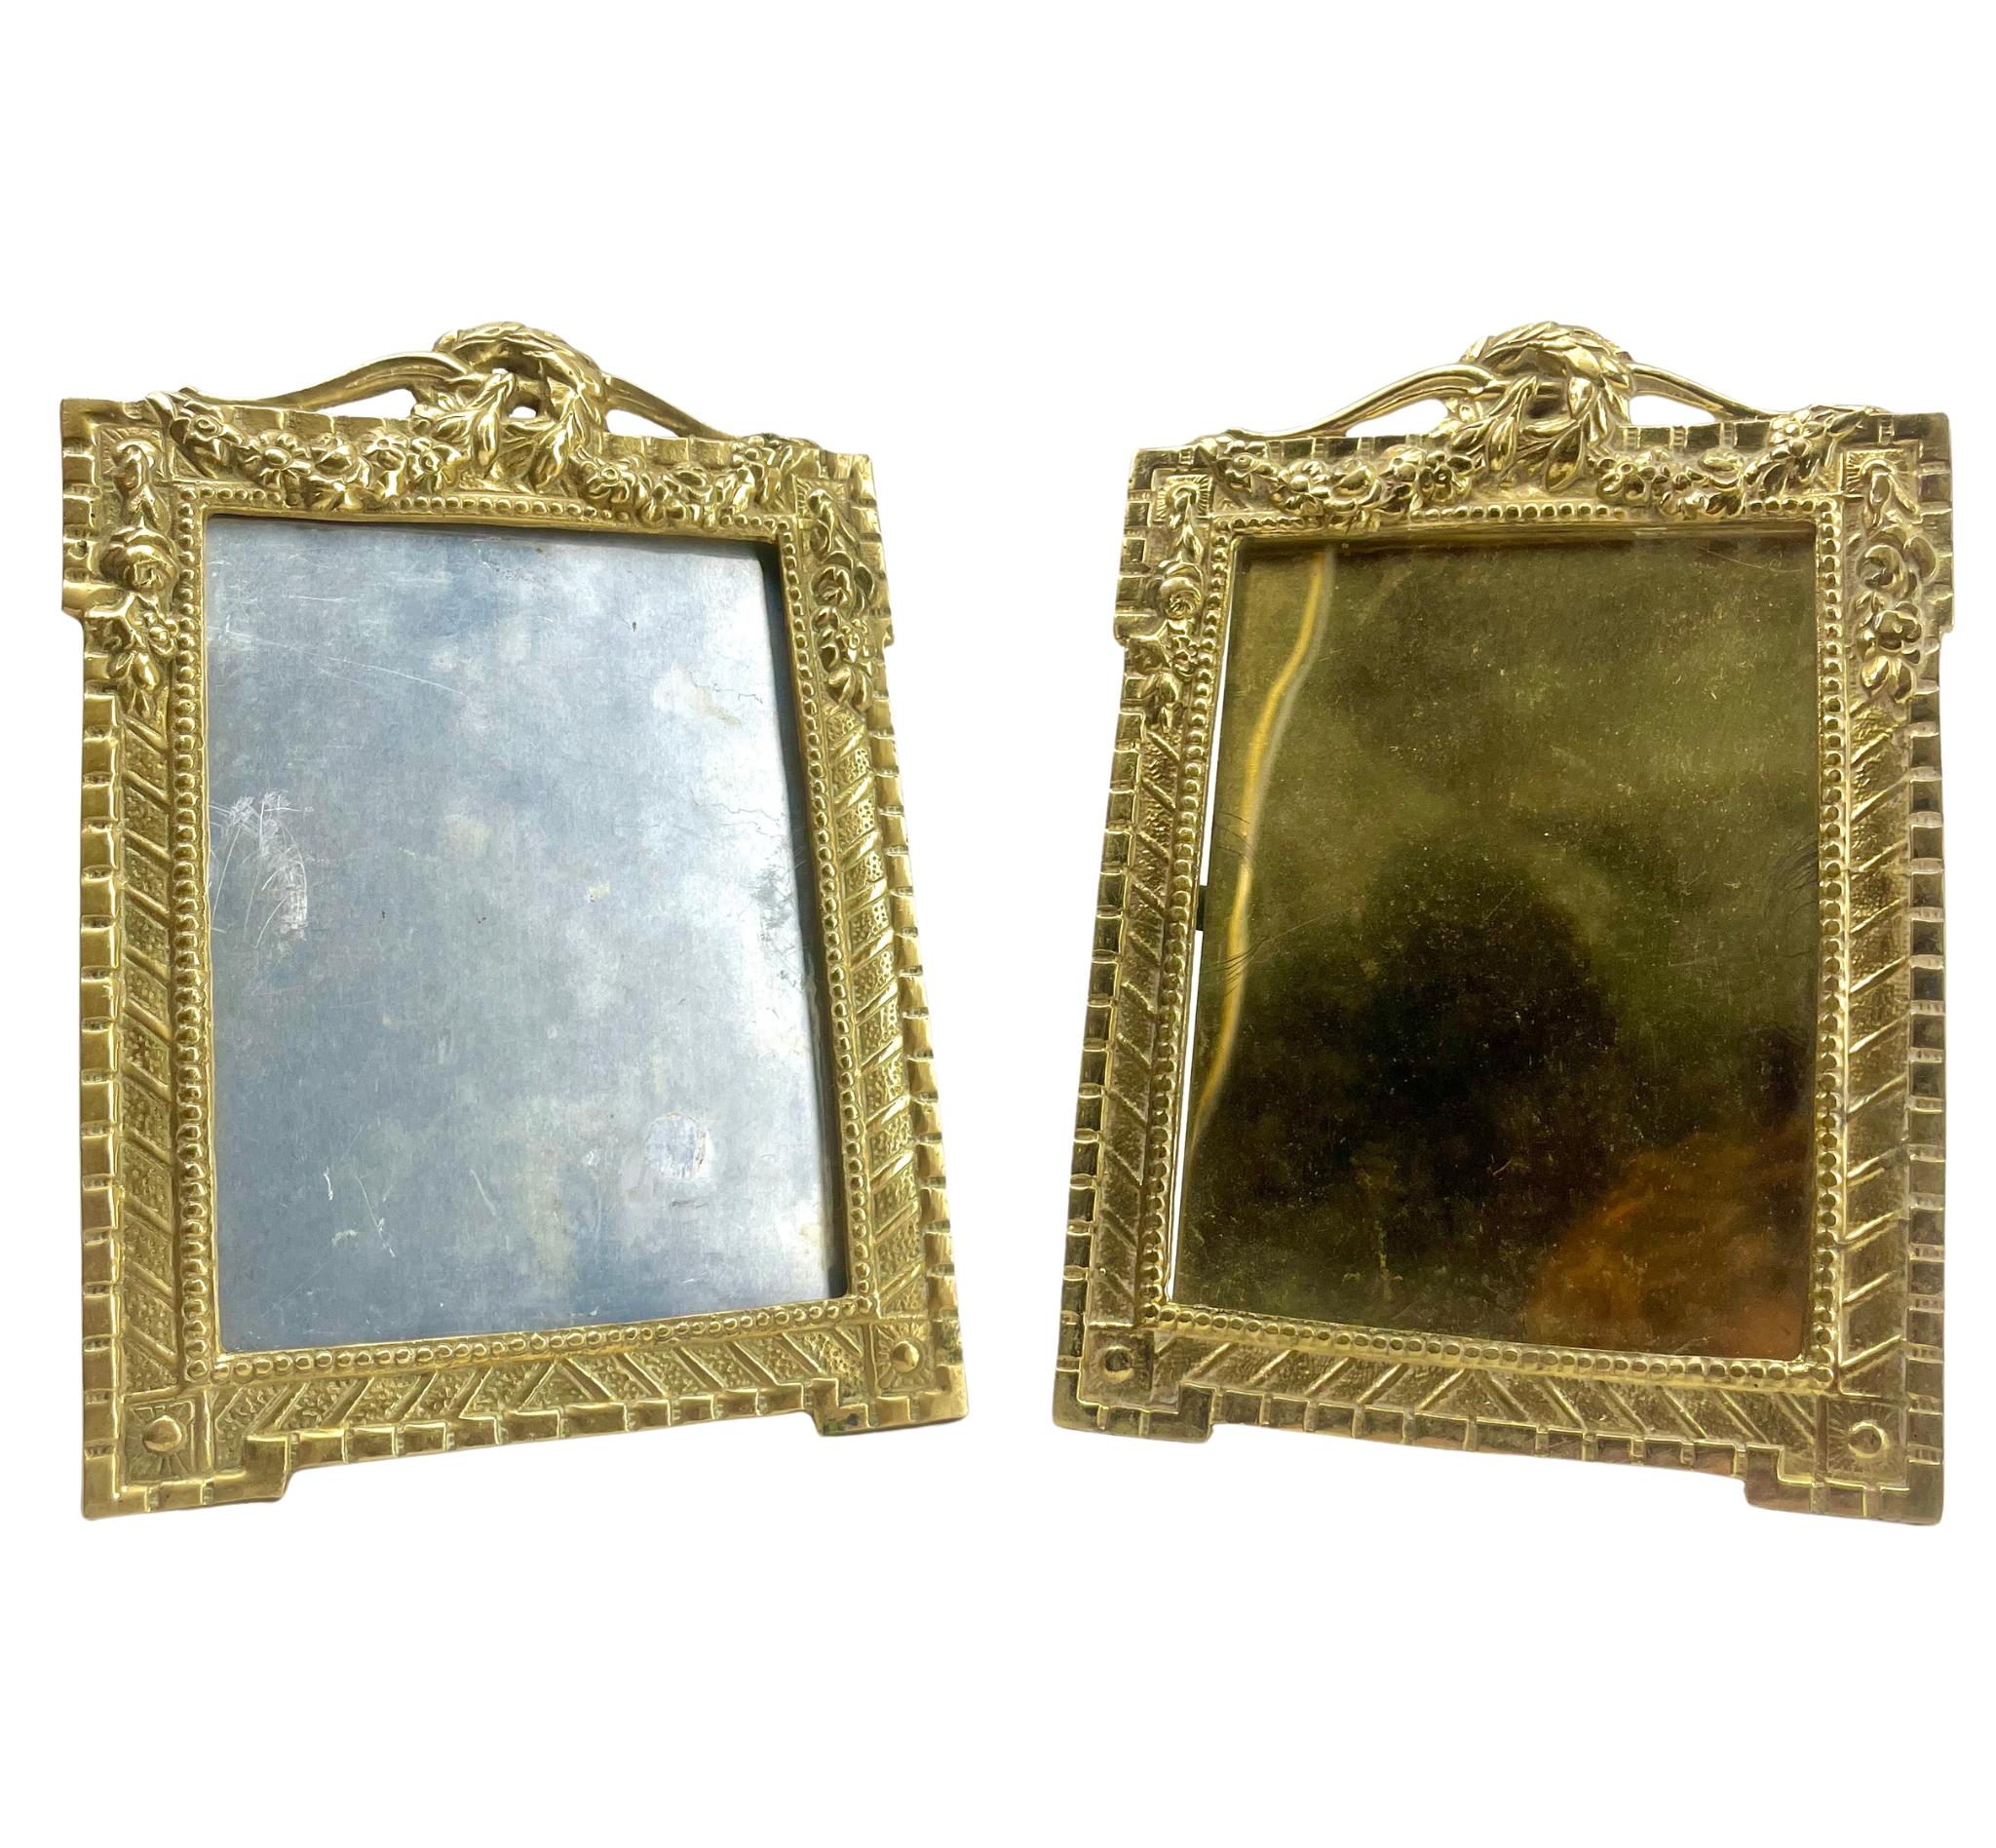 Pair of Picture Frame, Polished Brass, style of J.H. France, 1900s

Pair photograph frame (or miniature frame) with classical Victorian design. 
Typical frame for wedding photographs. 
Made of solid cast brass with a highly polished front surface